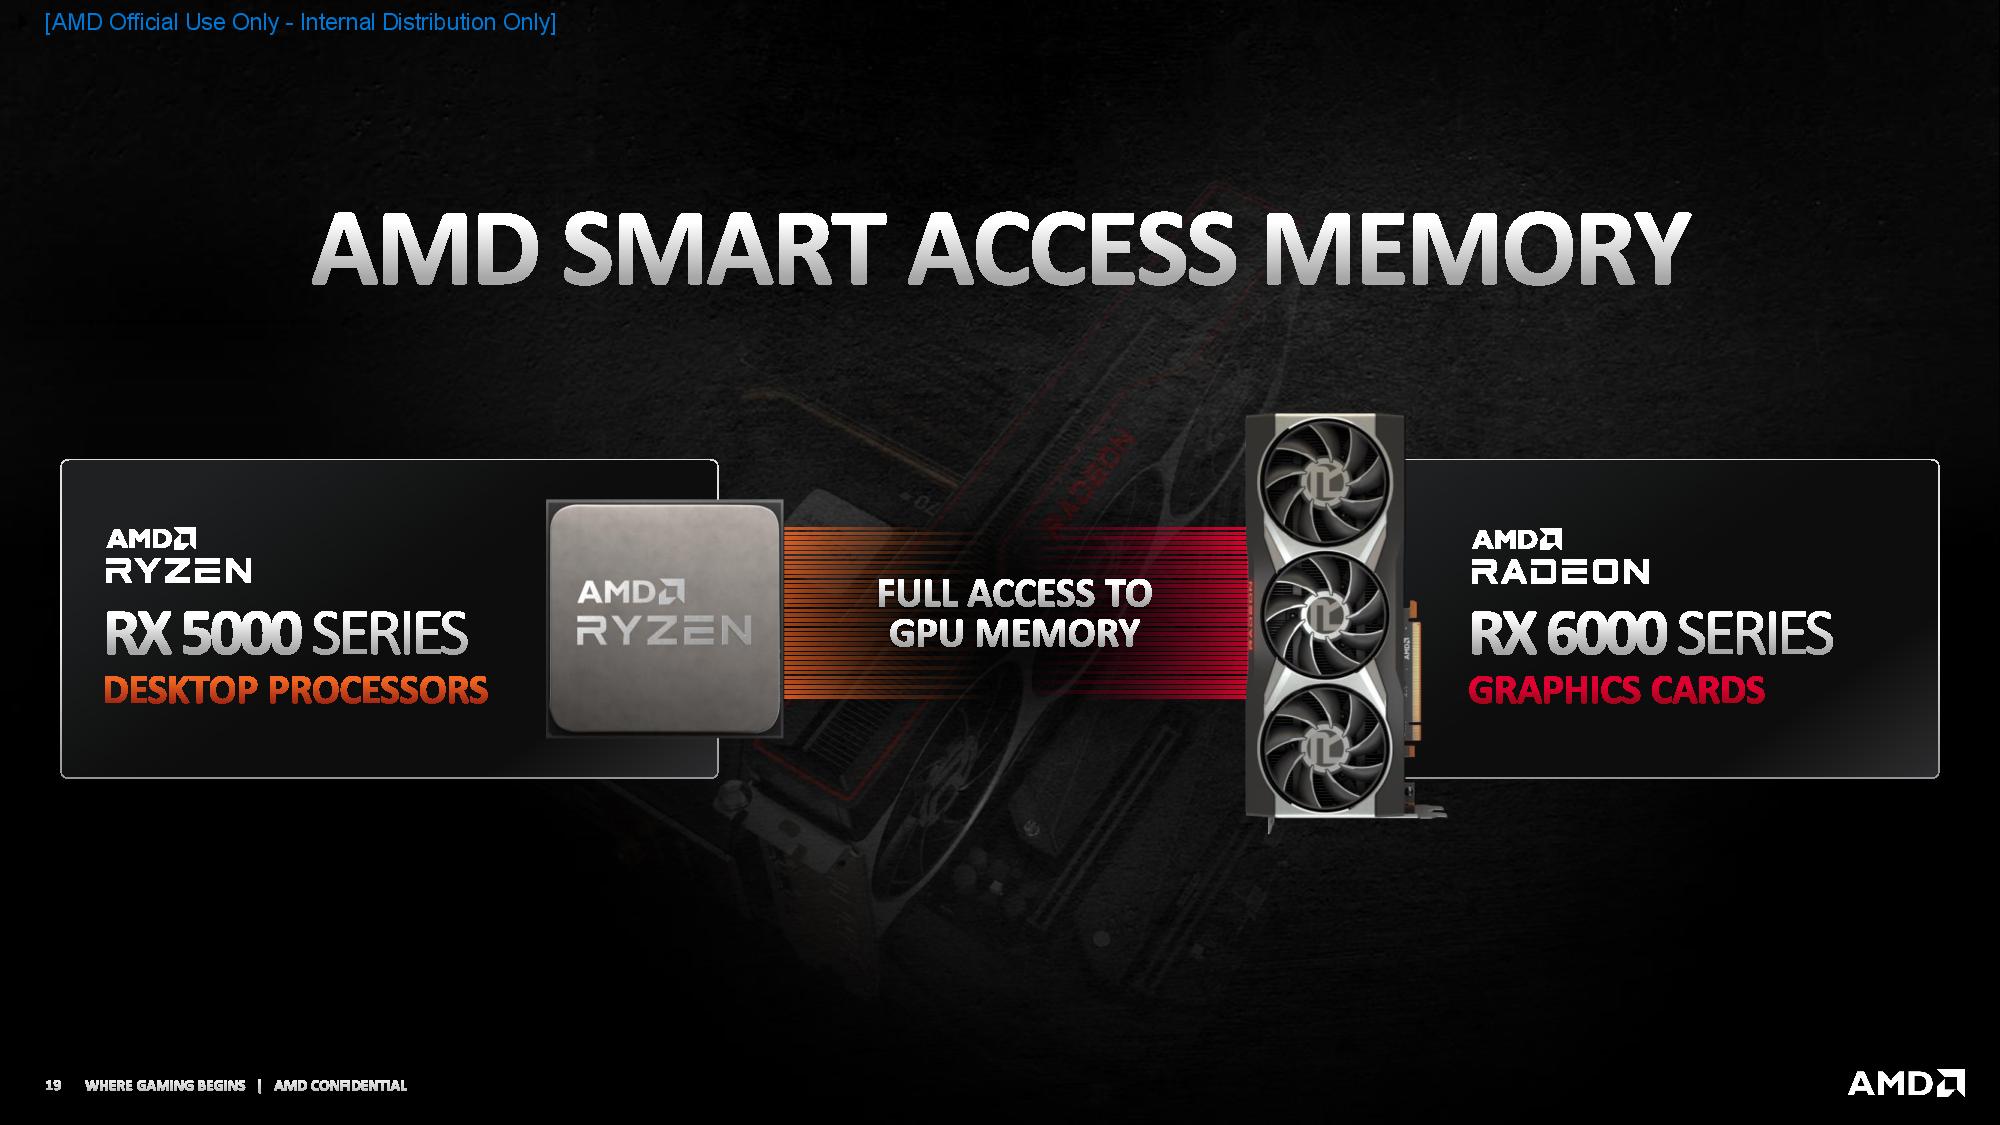 AMD Helping to Bring Smart Access 